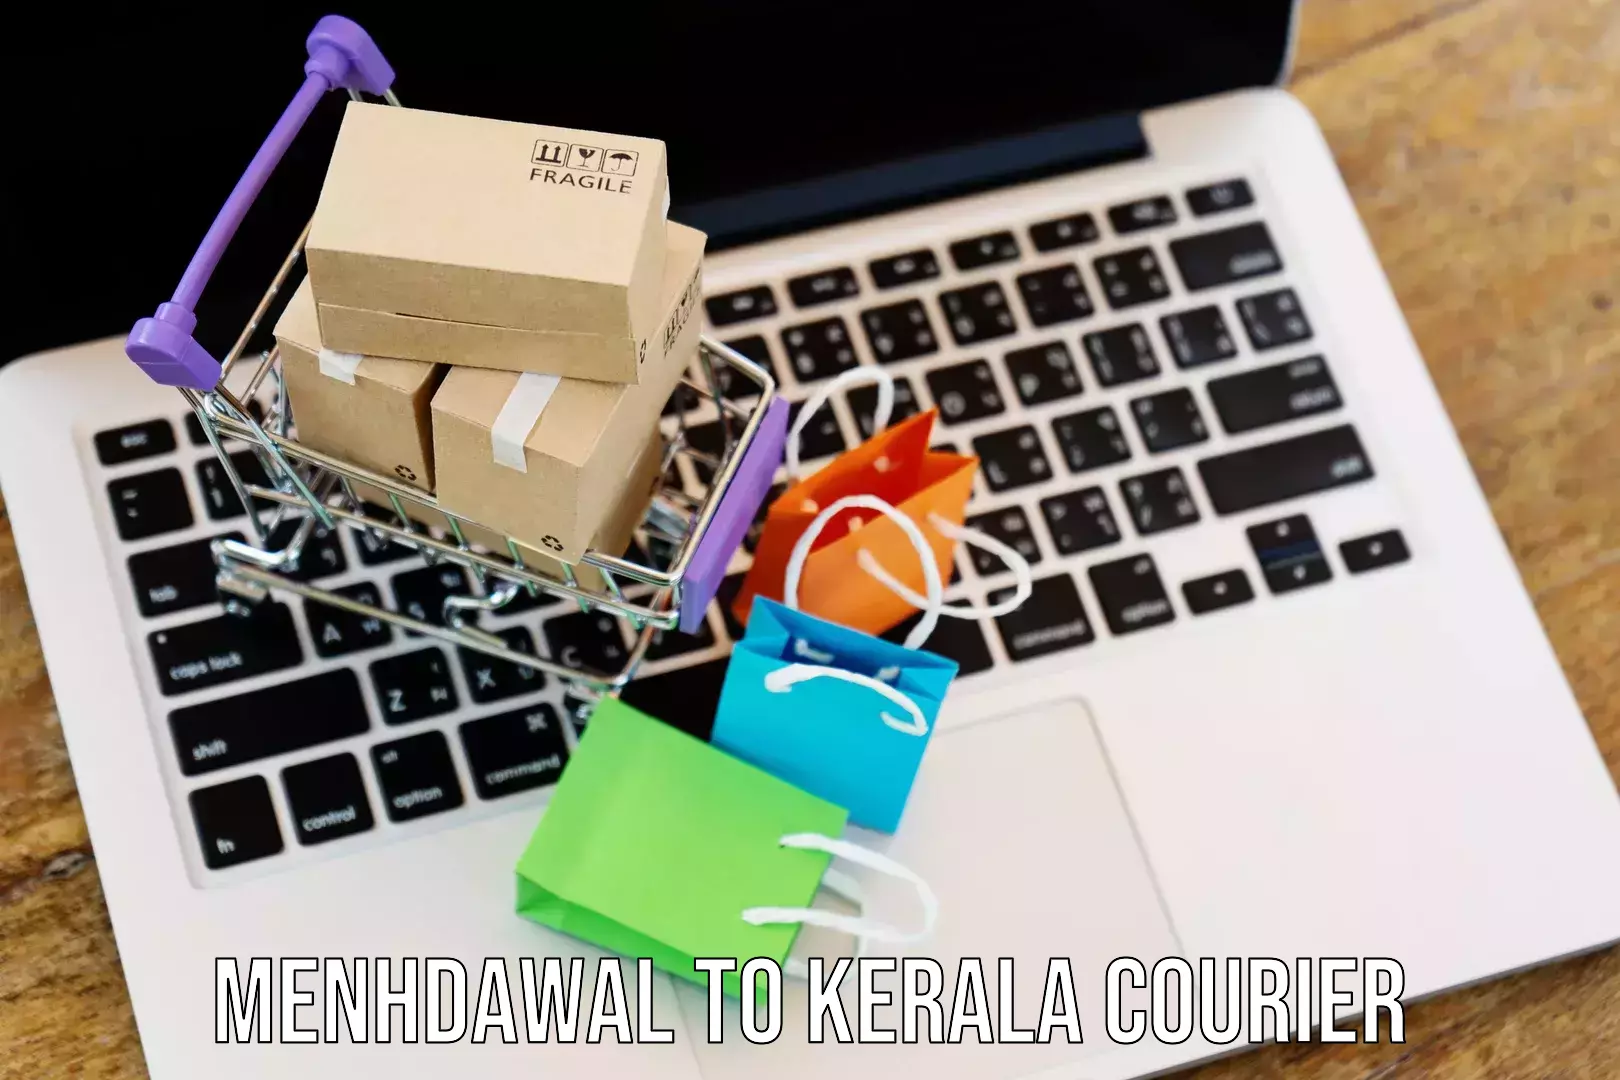 Customer-friendly courier services Menhdawal to Kerala